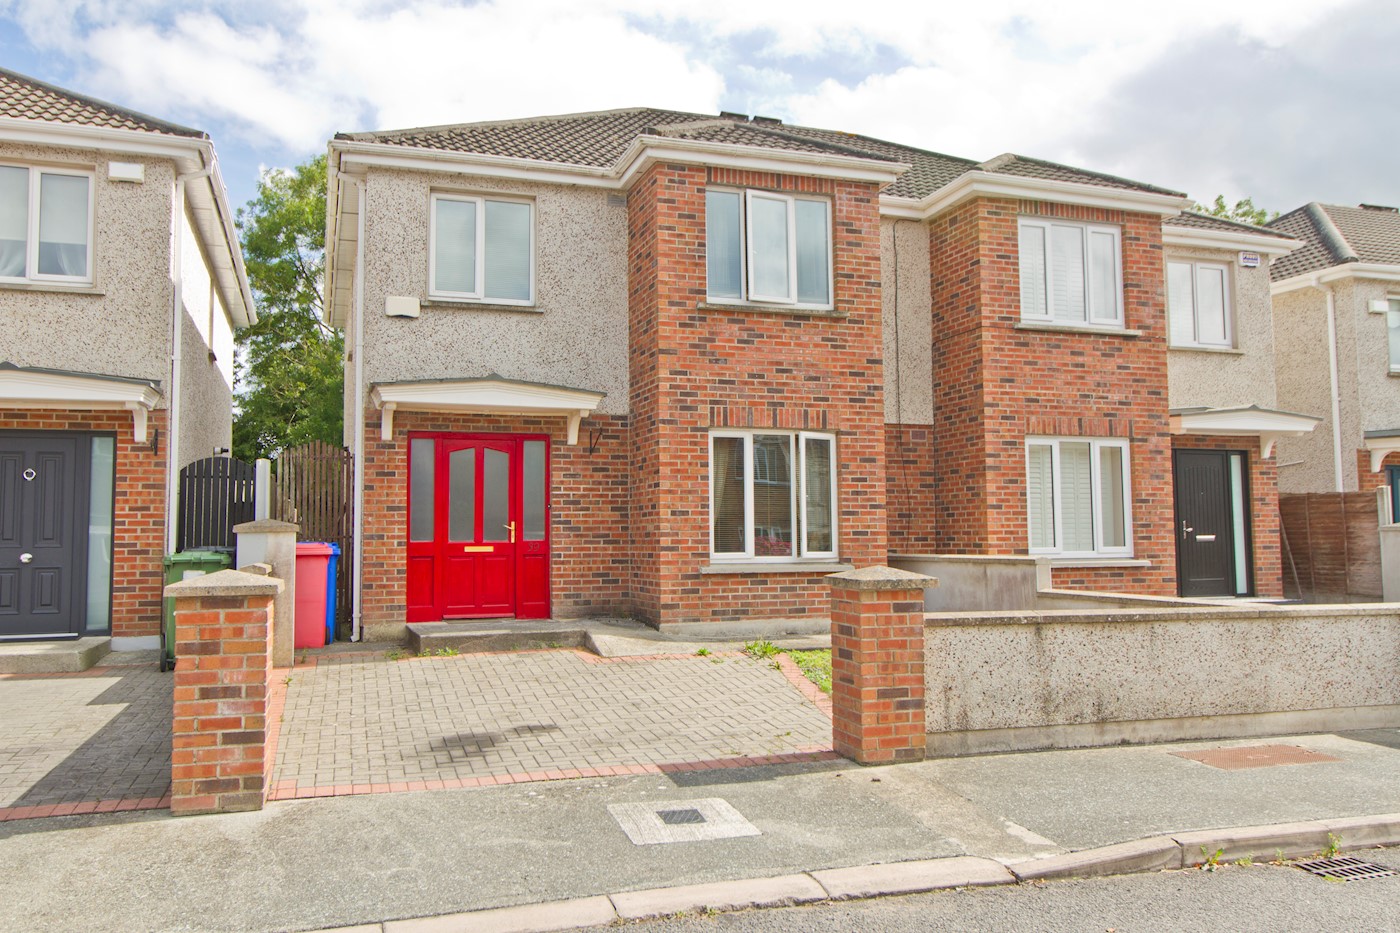 39 Woodgrove Heights, Dunleer, Co. Louth, A92 P2W8 1/11